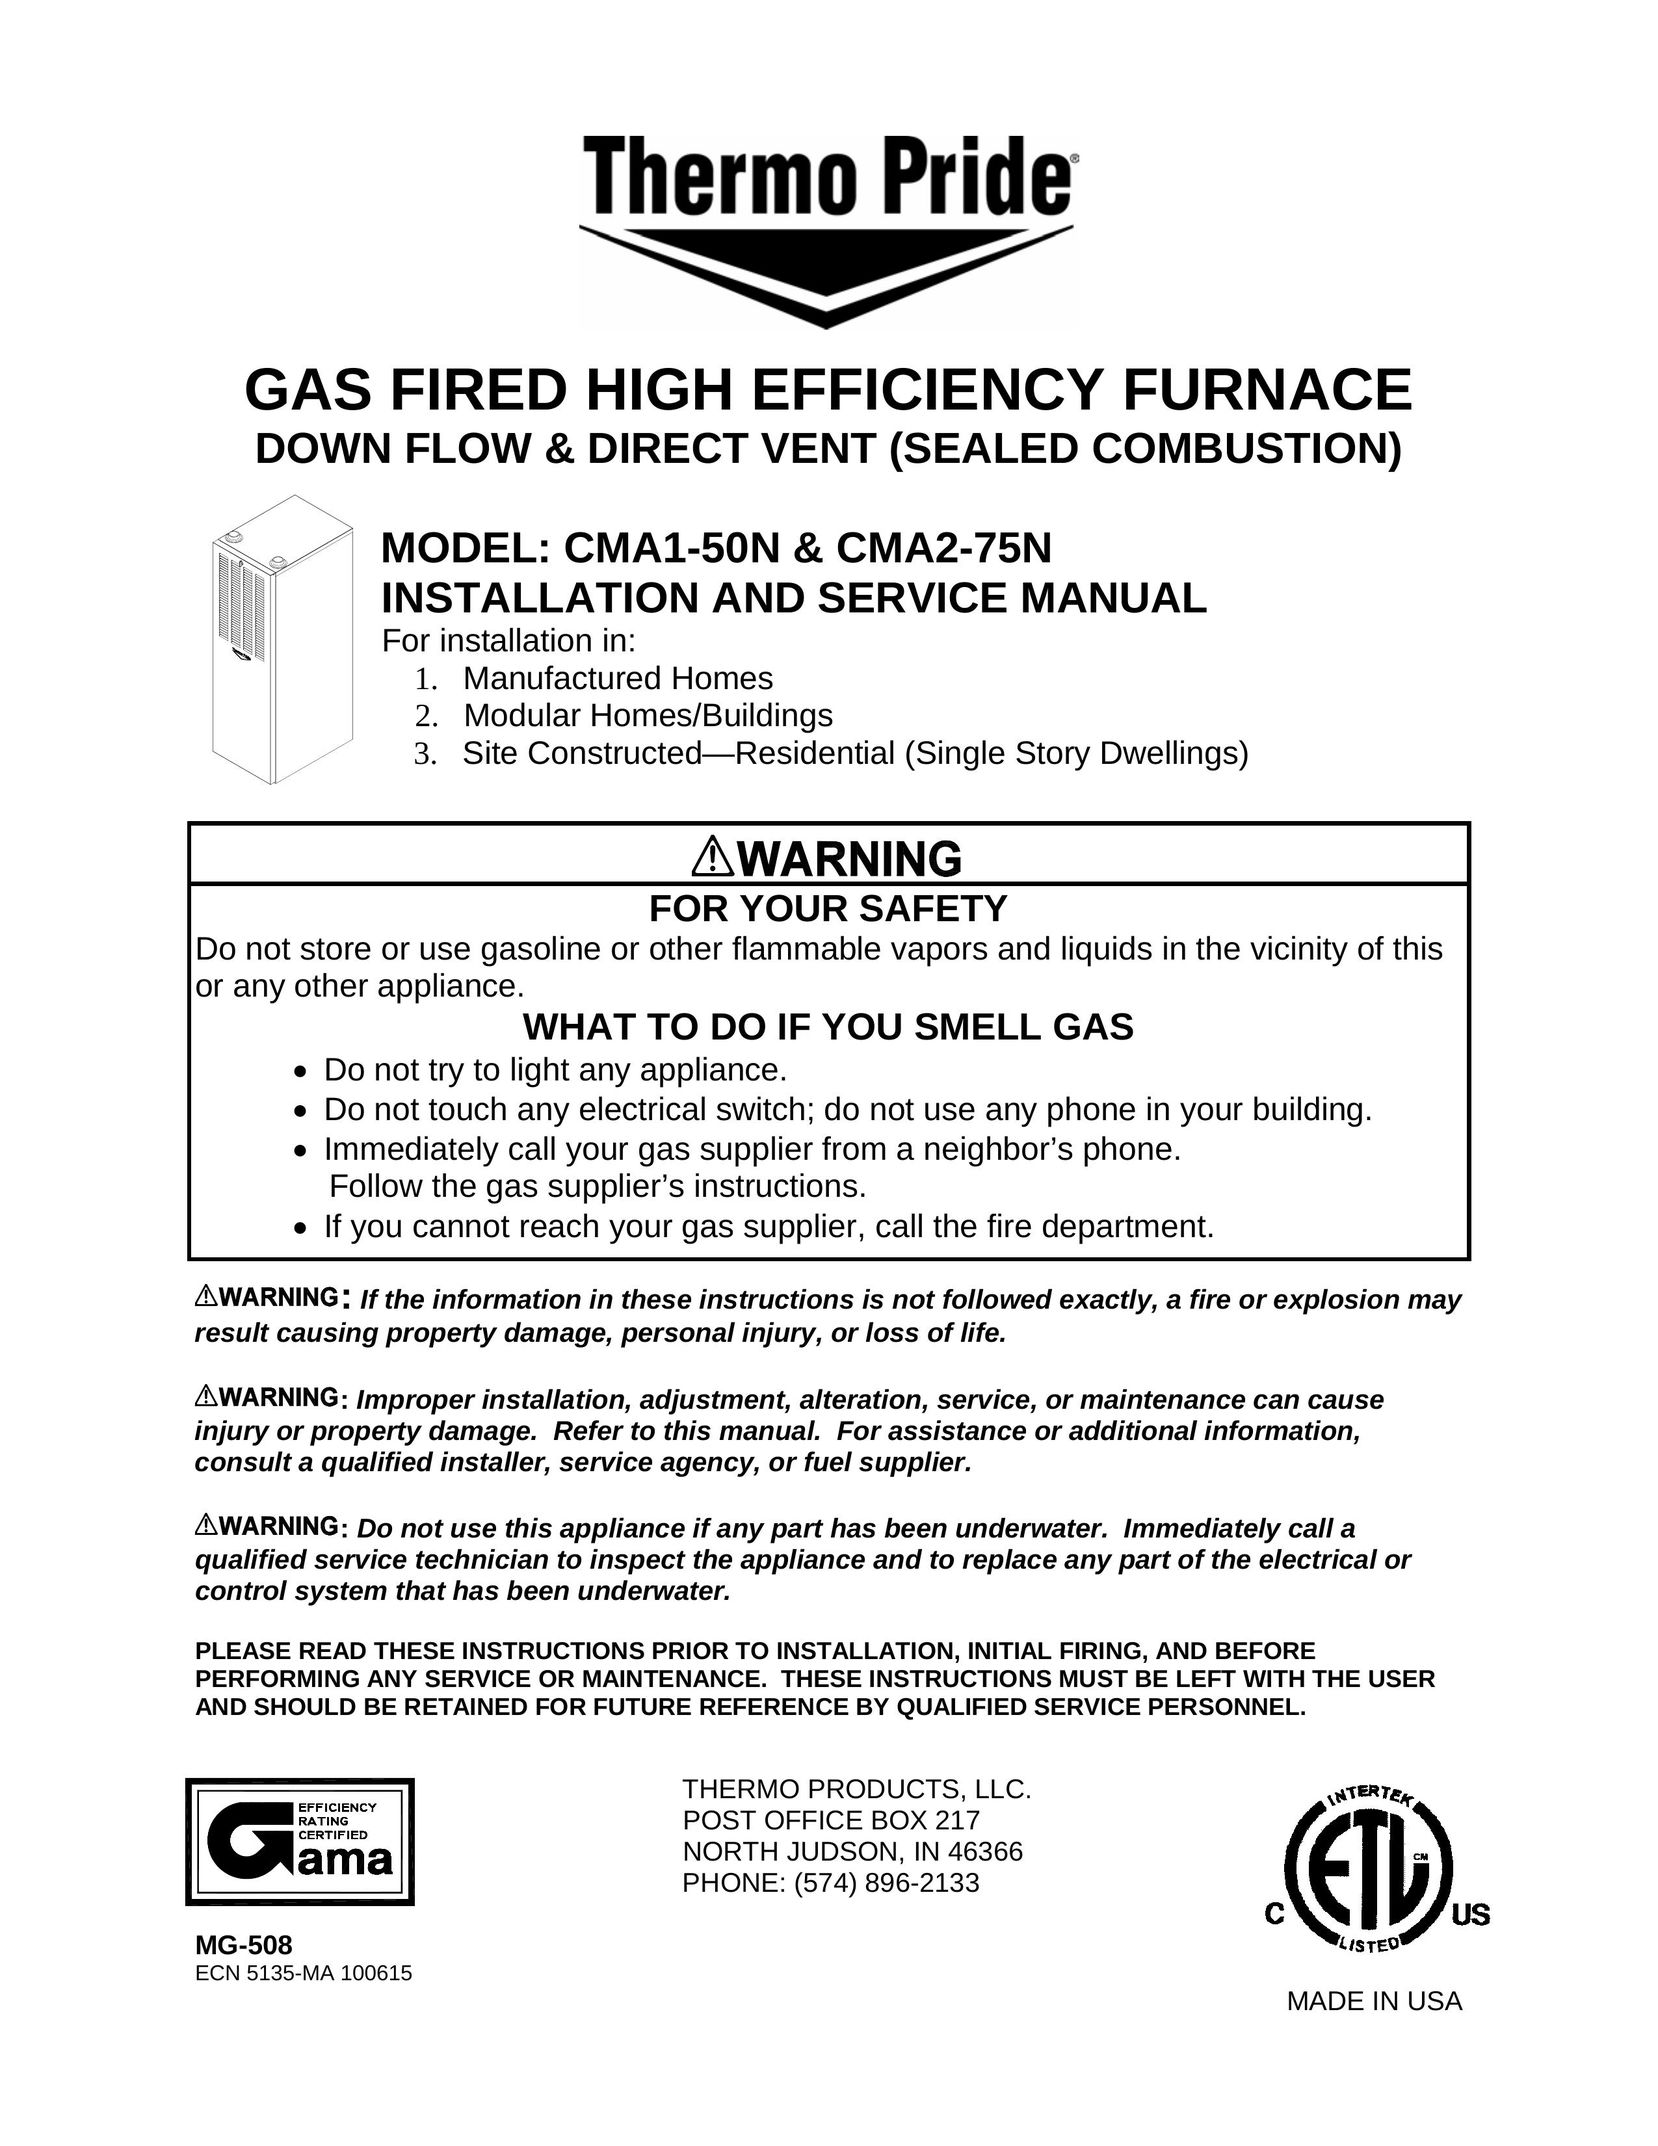 Thermo Products CMA2-75N Burner User Manual